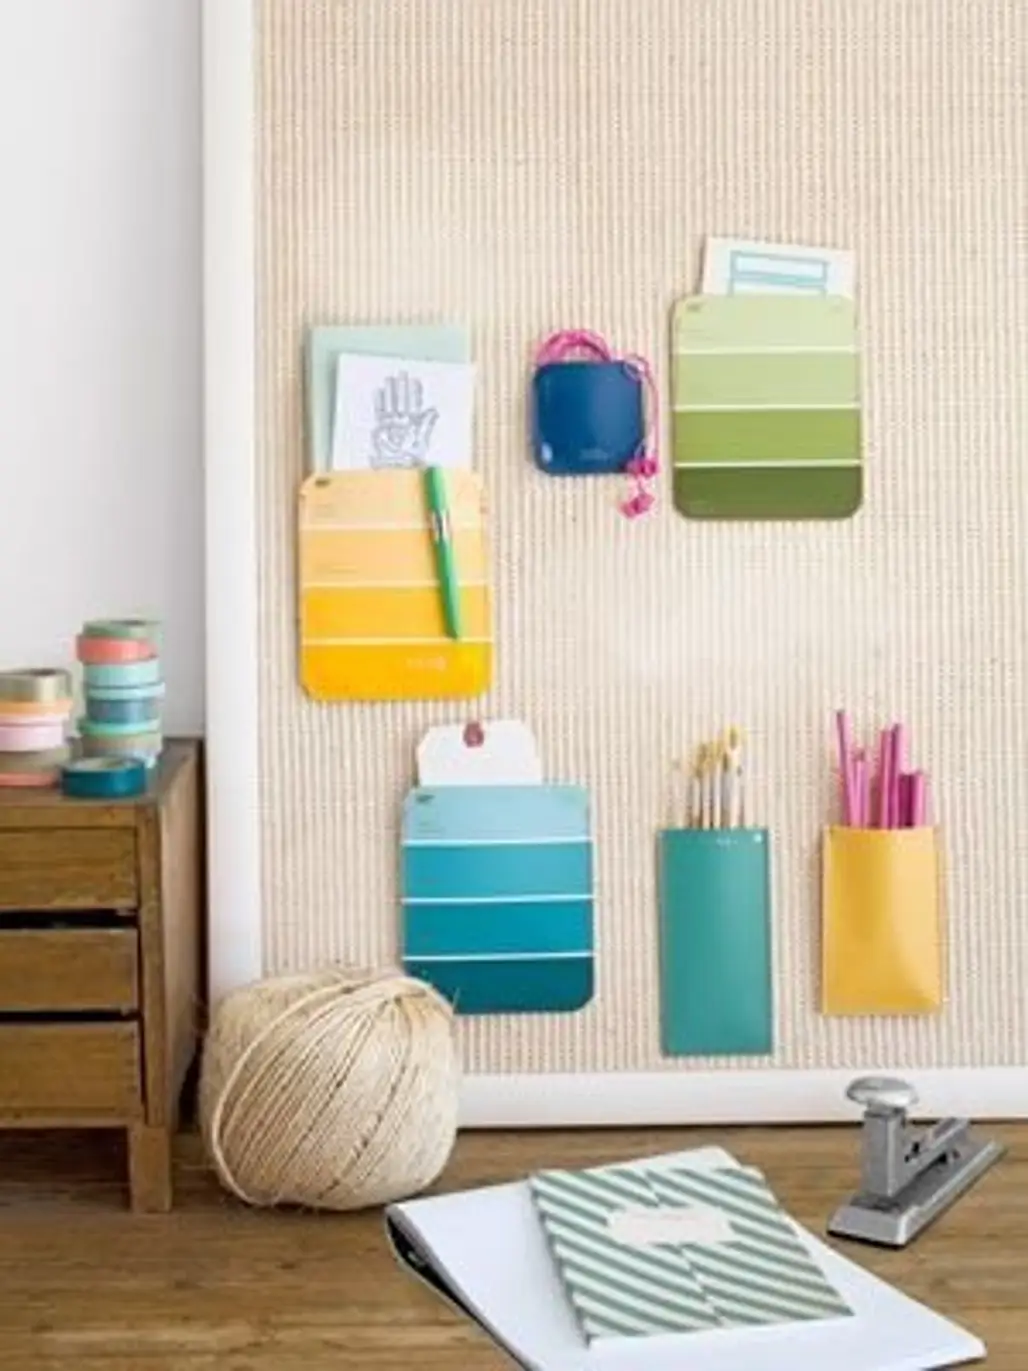 How to Make Paint-swatch Organizers